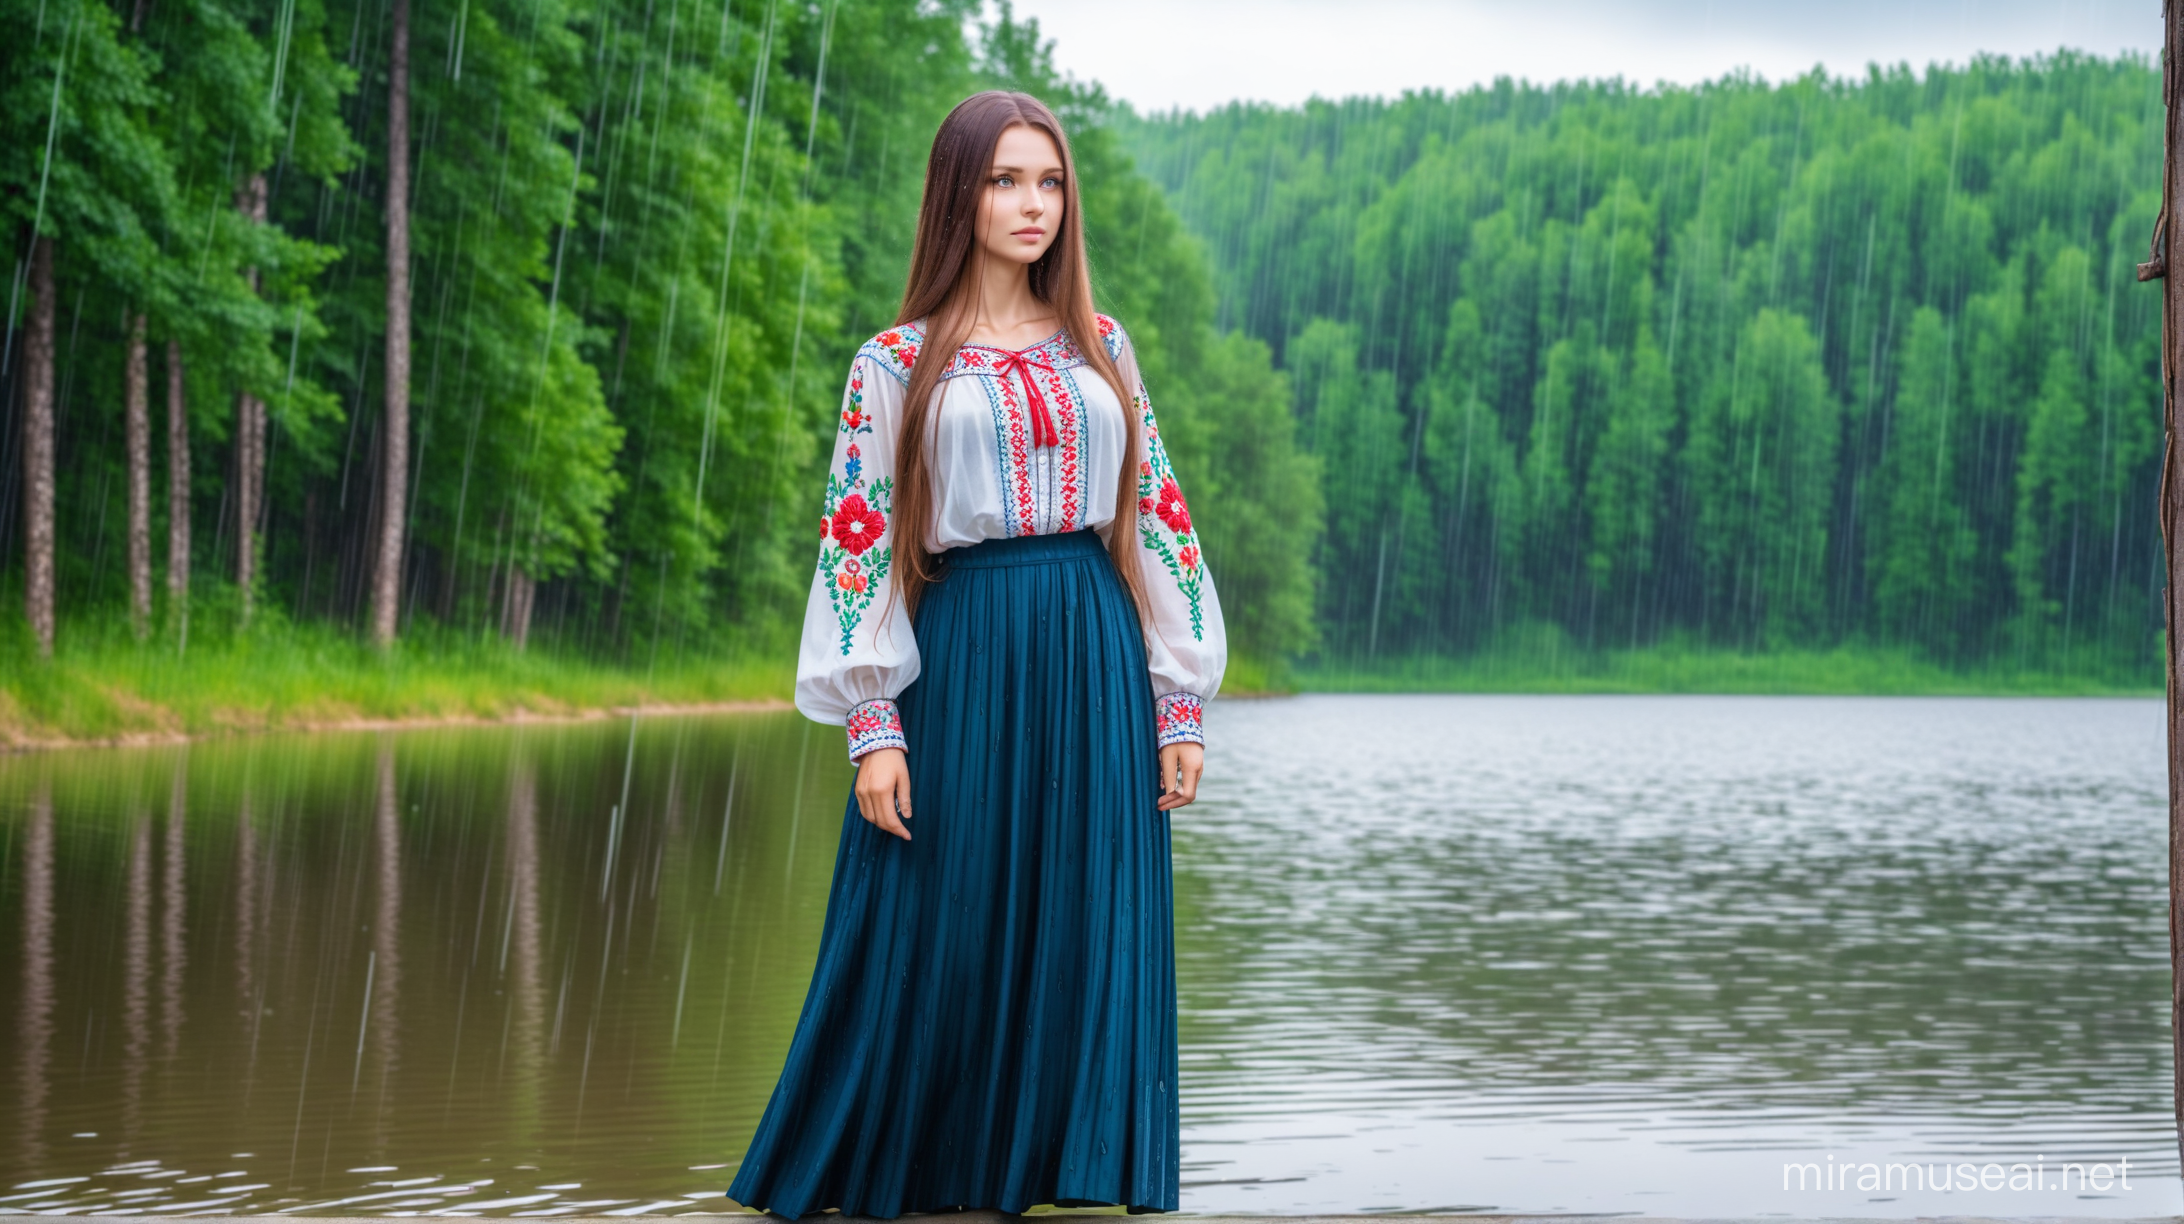 Ukrainian Woman in Embroidered Shirt by Forest Lake Under Rain